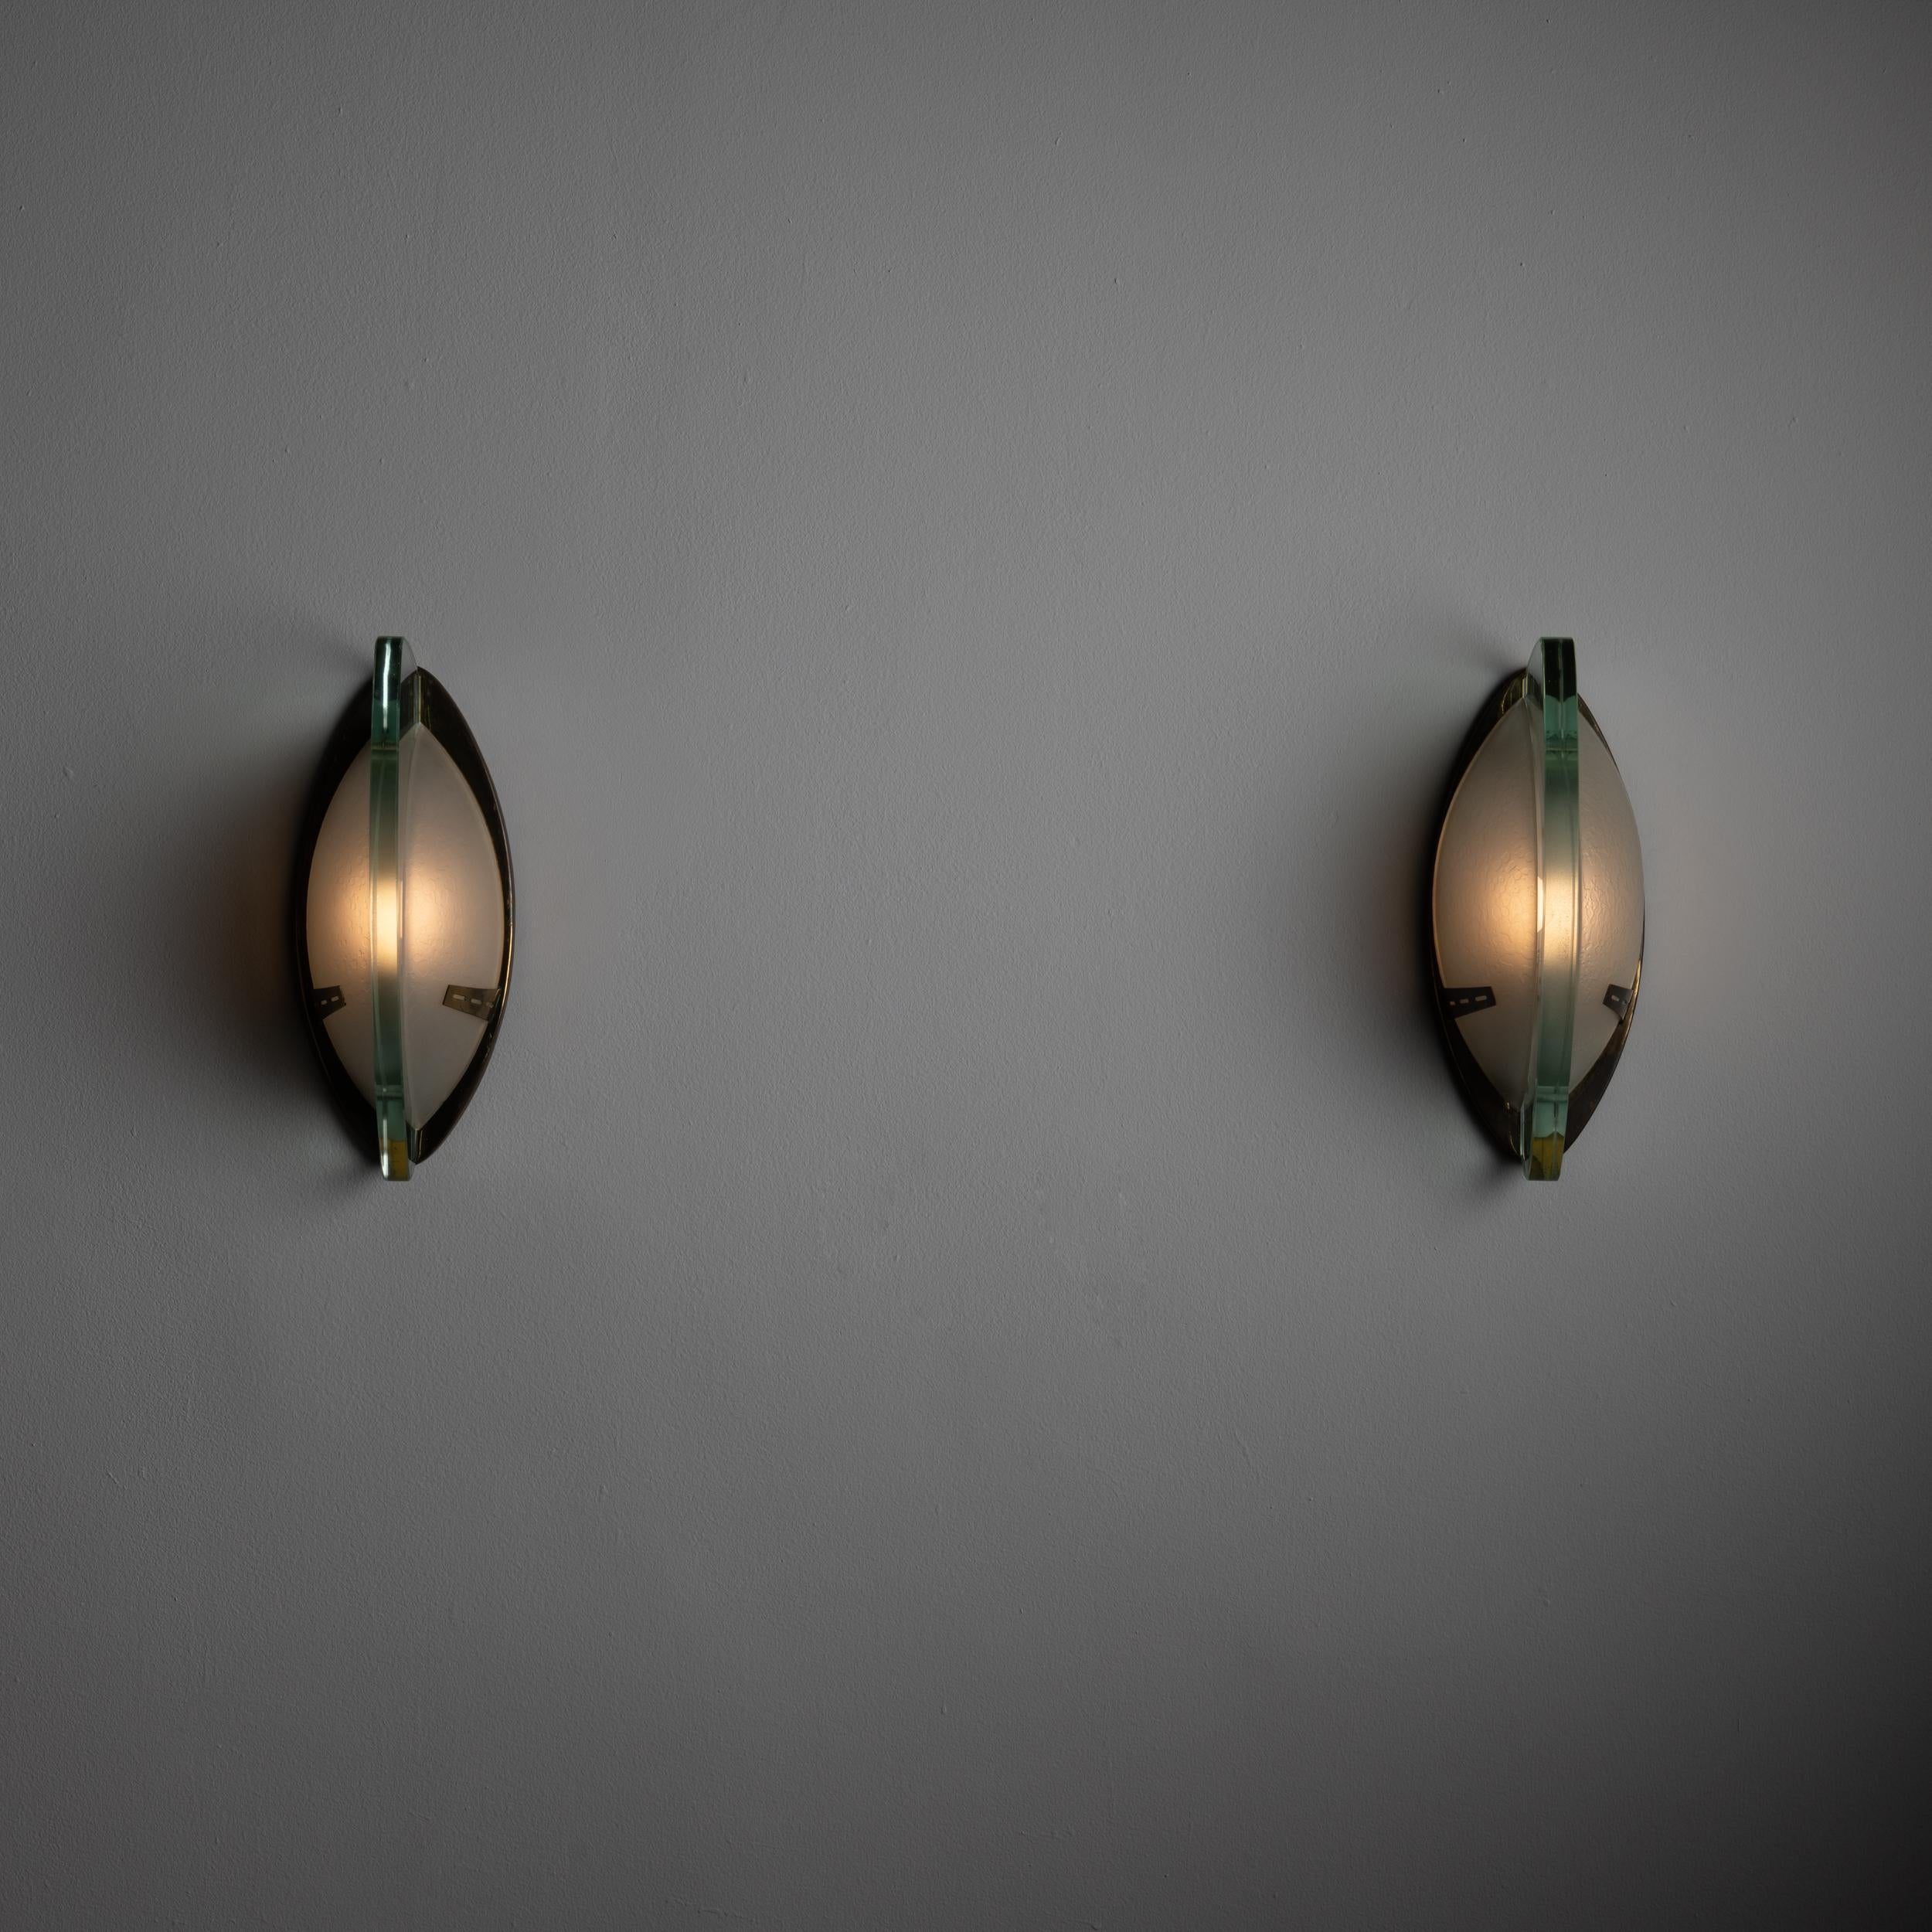 Patinated Rare Pair of Sconces by Stilnovo, Model 2122